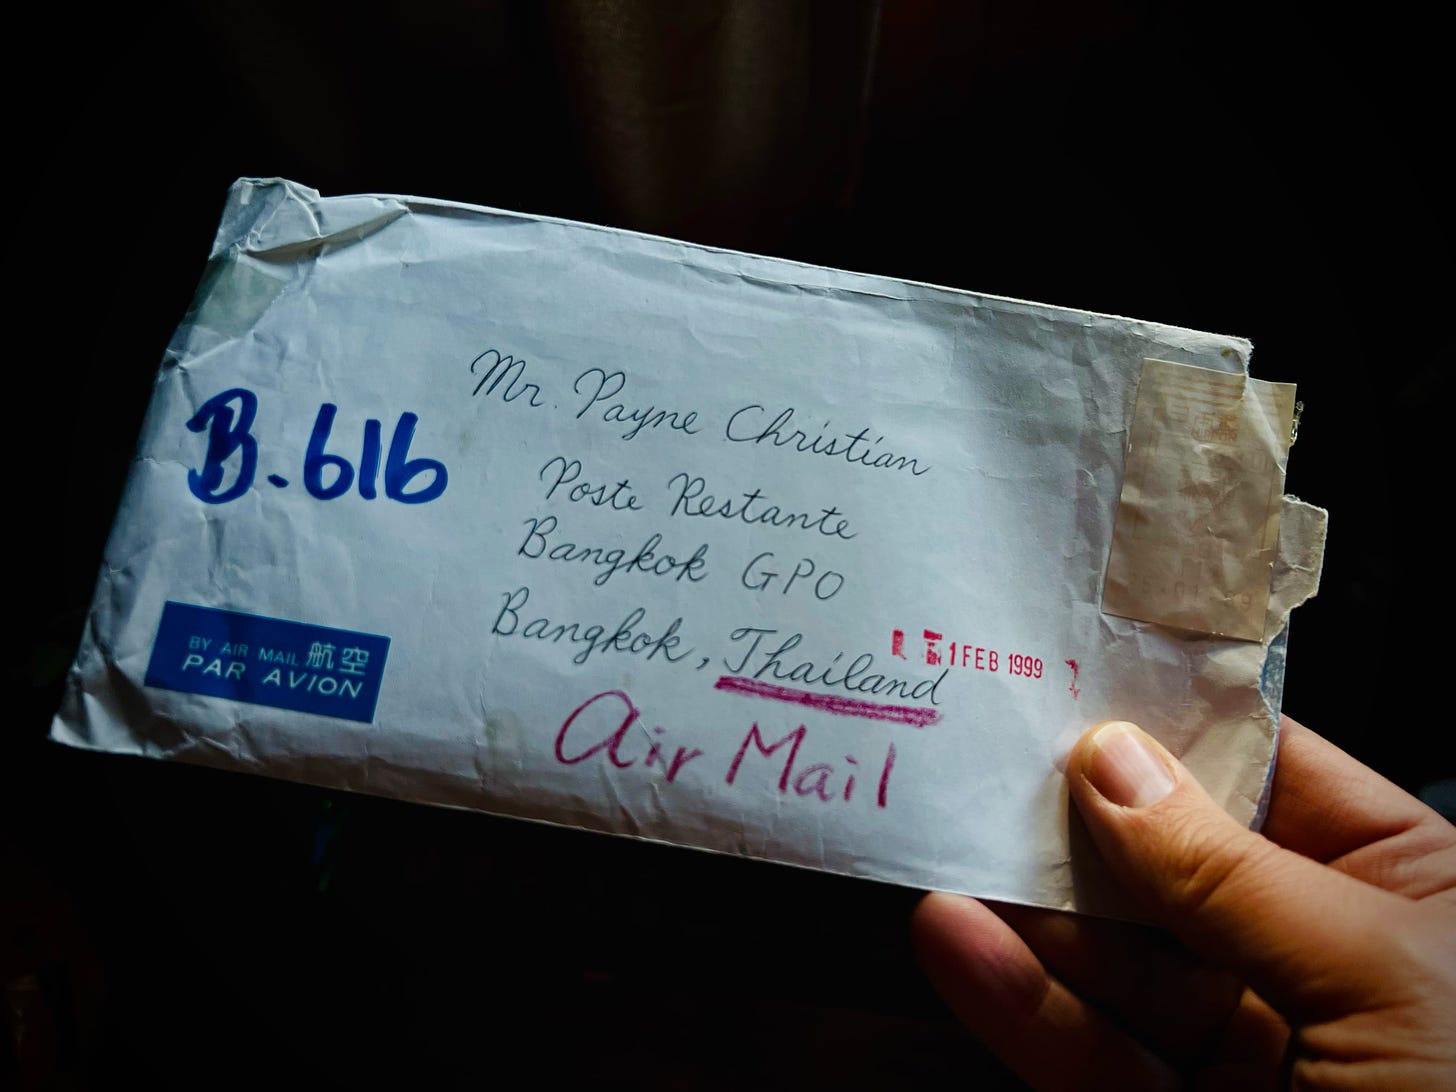 An envelope is addressed to Mr Christian, Payne, post rest, Dante Bangkok, GPO, Bangkok, Thailand, it is dated the 1st of February 1999